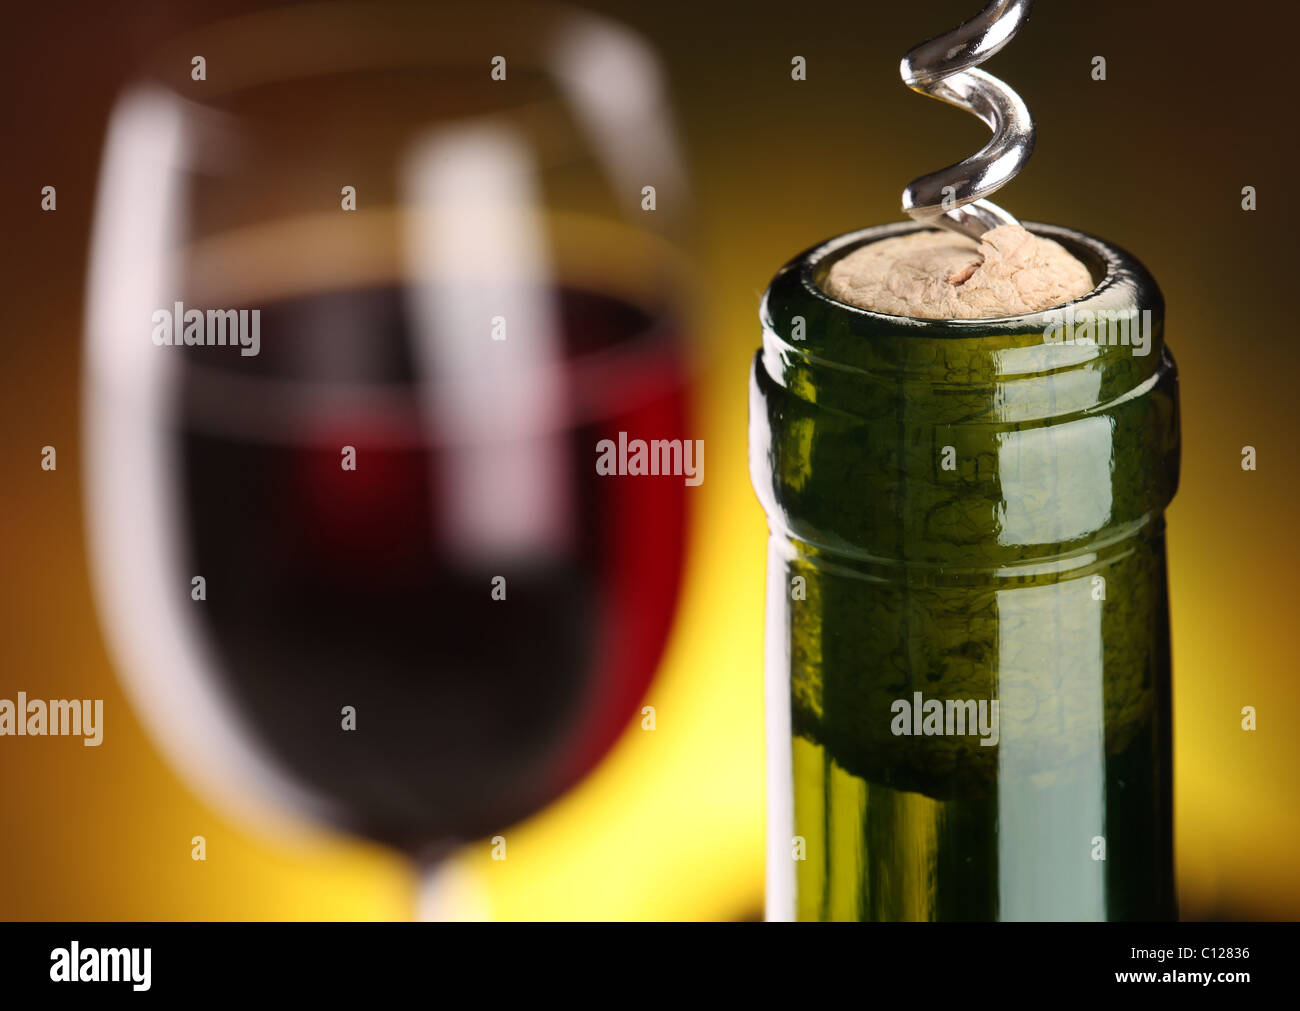 Still life with glass and bottle of wine. Stock Photo